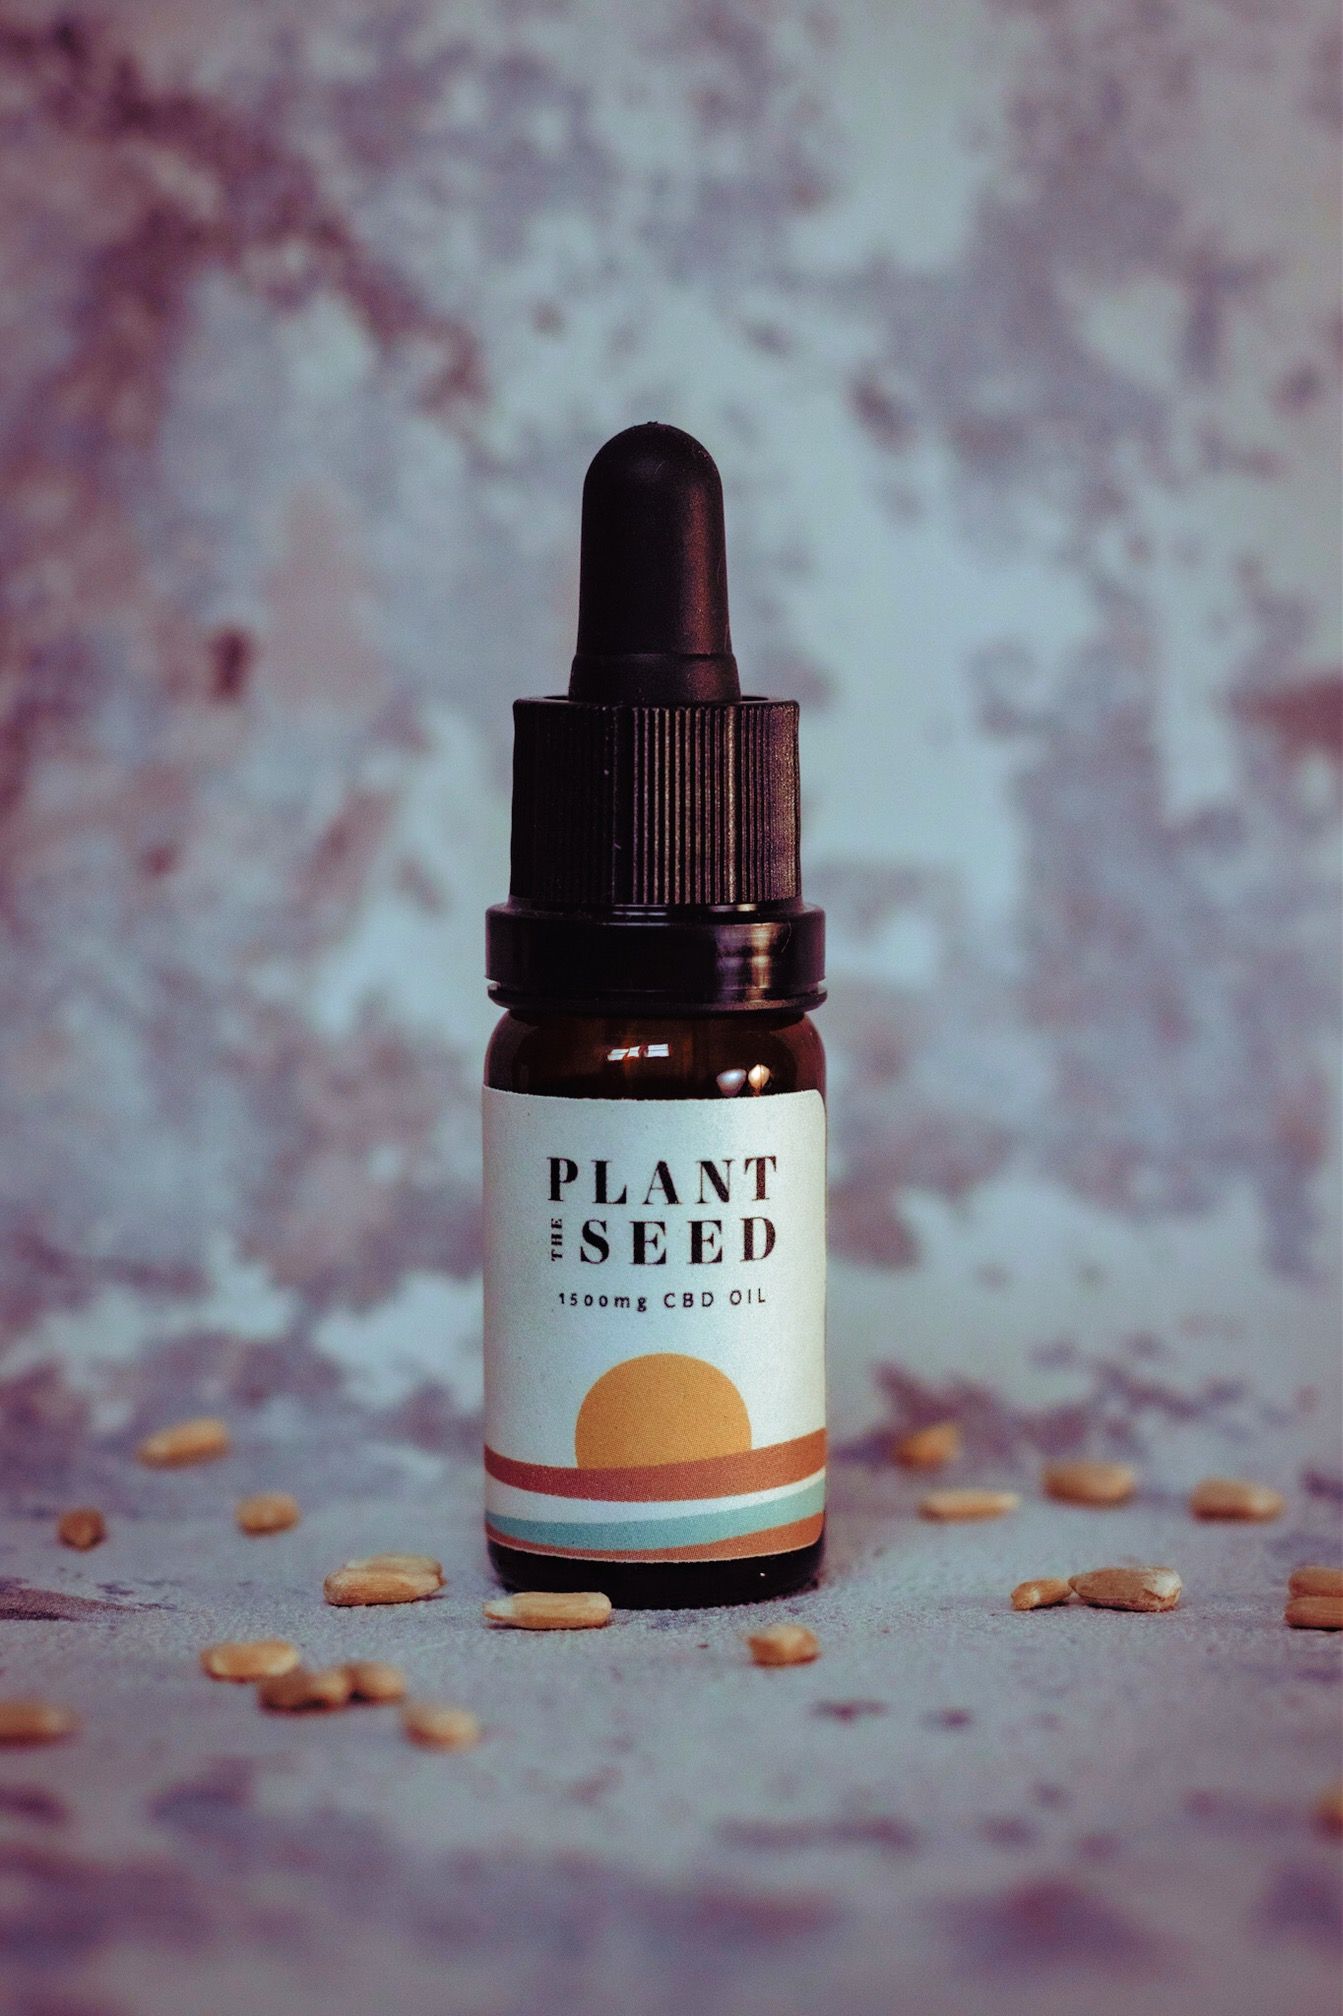 PLANT THE SEED CBD OIL (REVIEW)